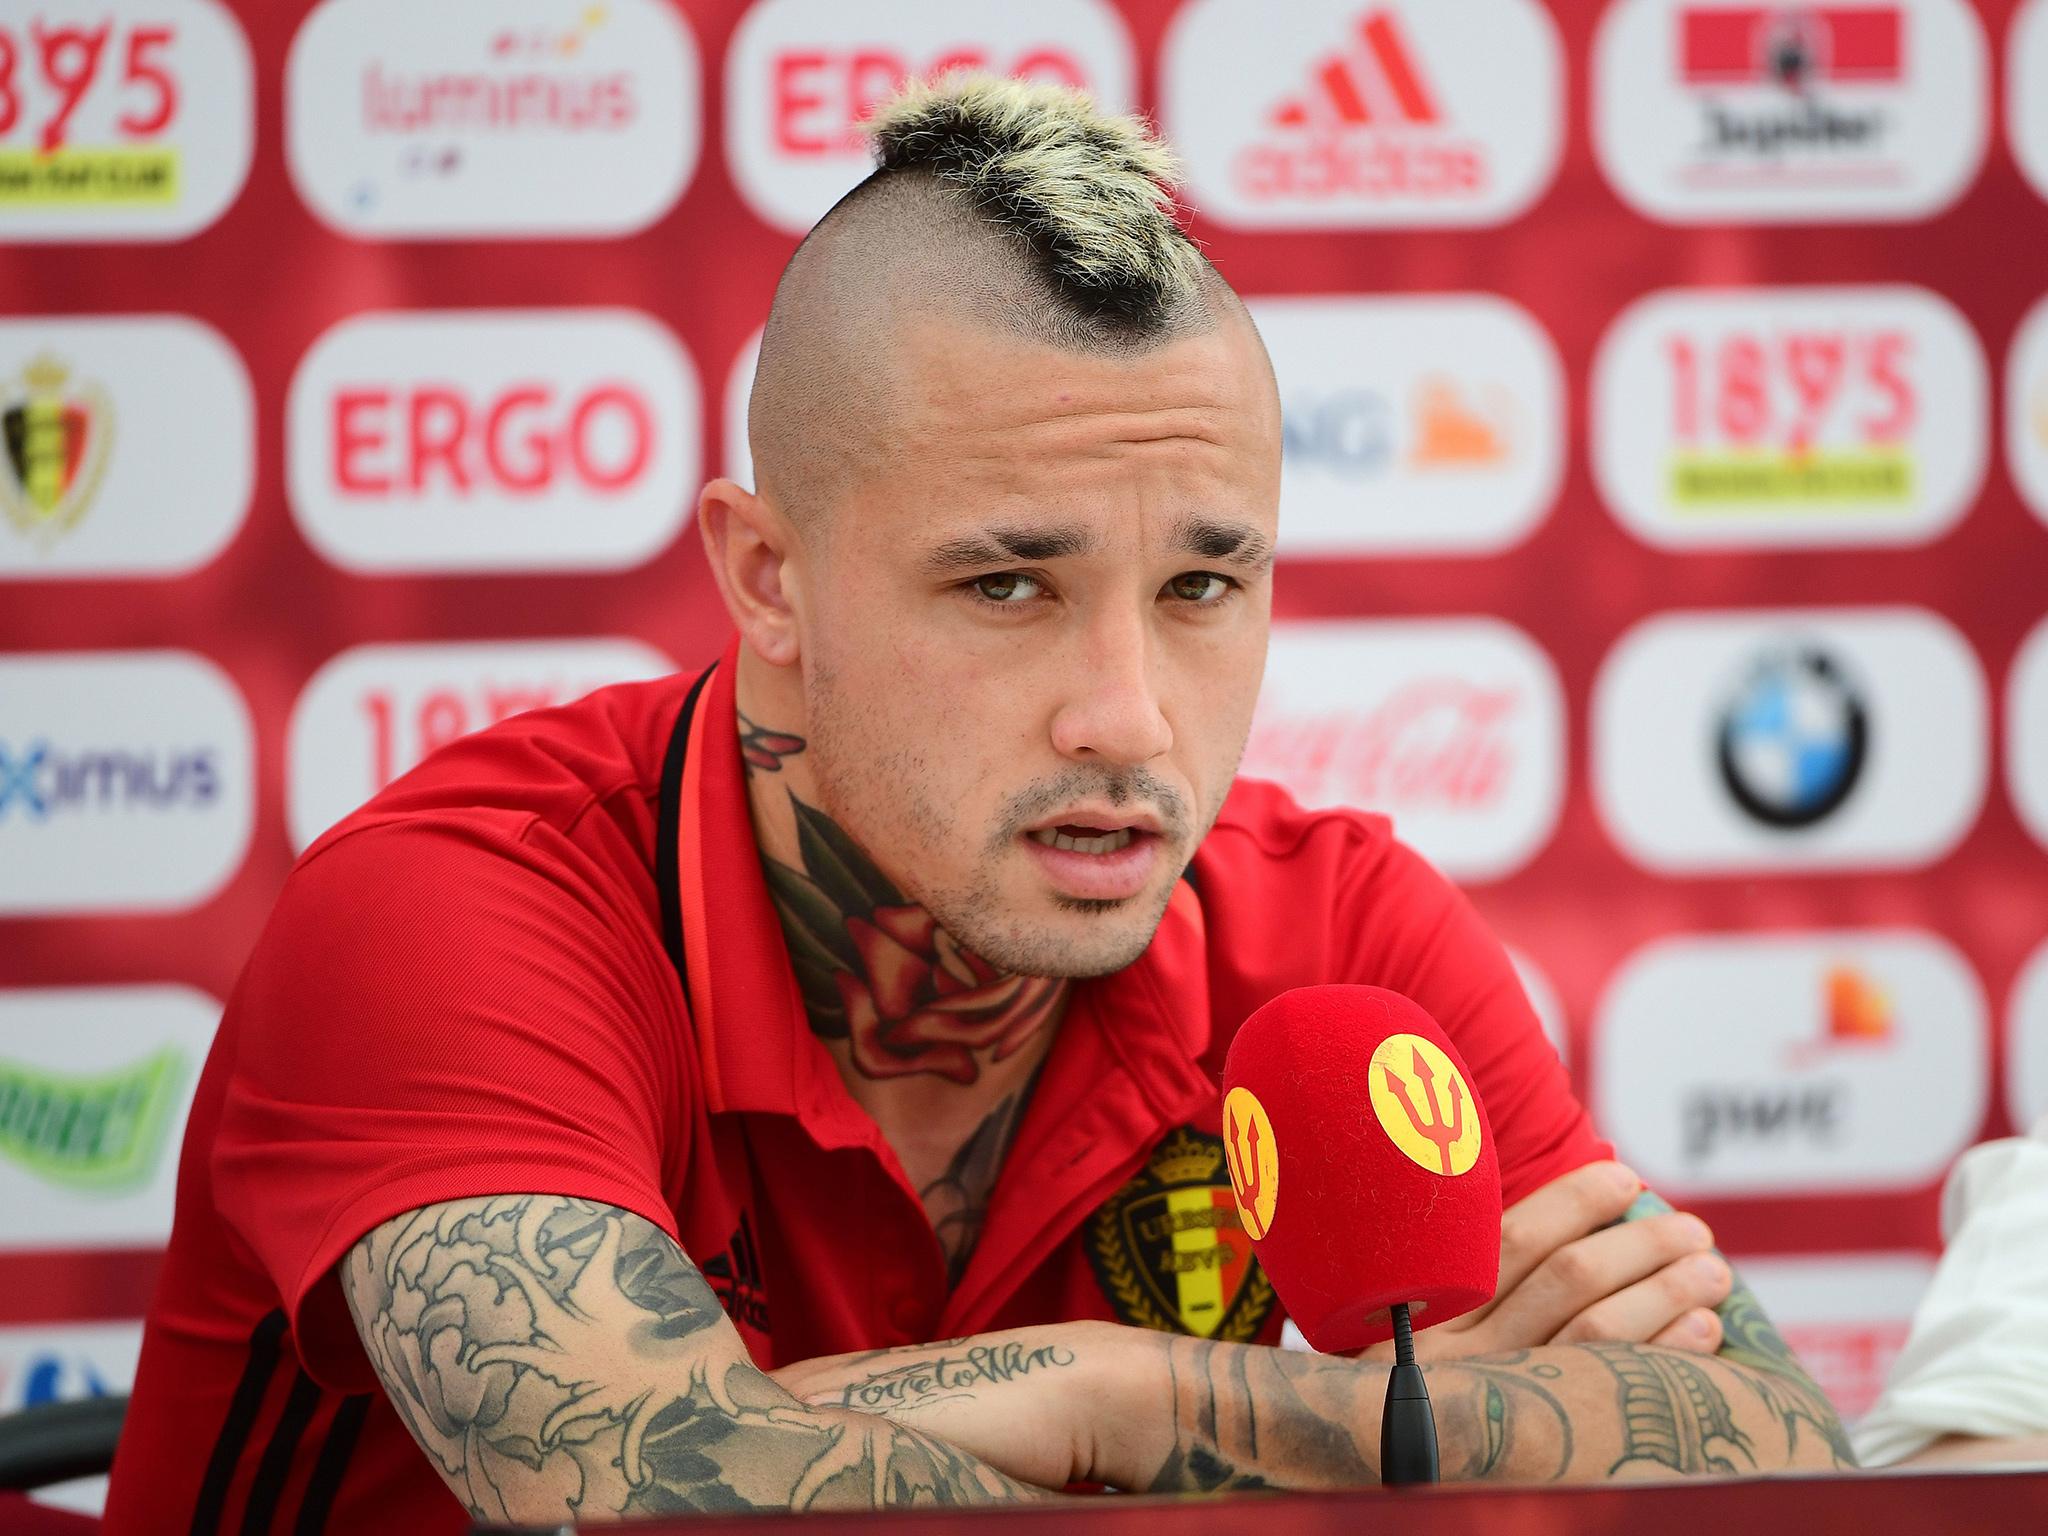 Nainggolan is currently on international duty with Belgium at the European Championships